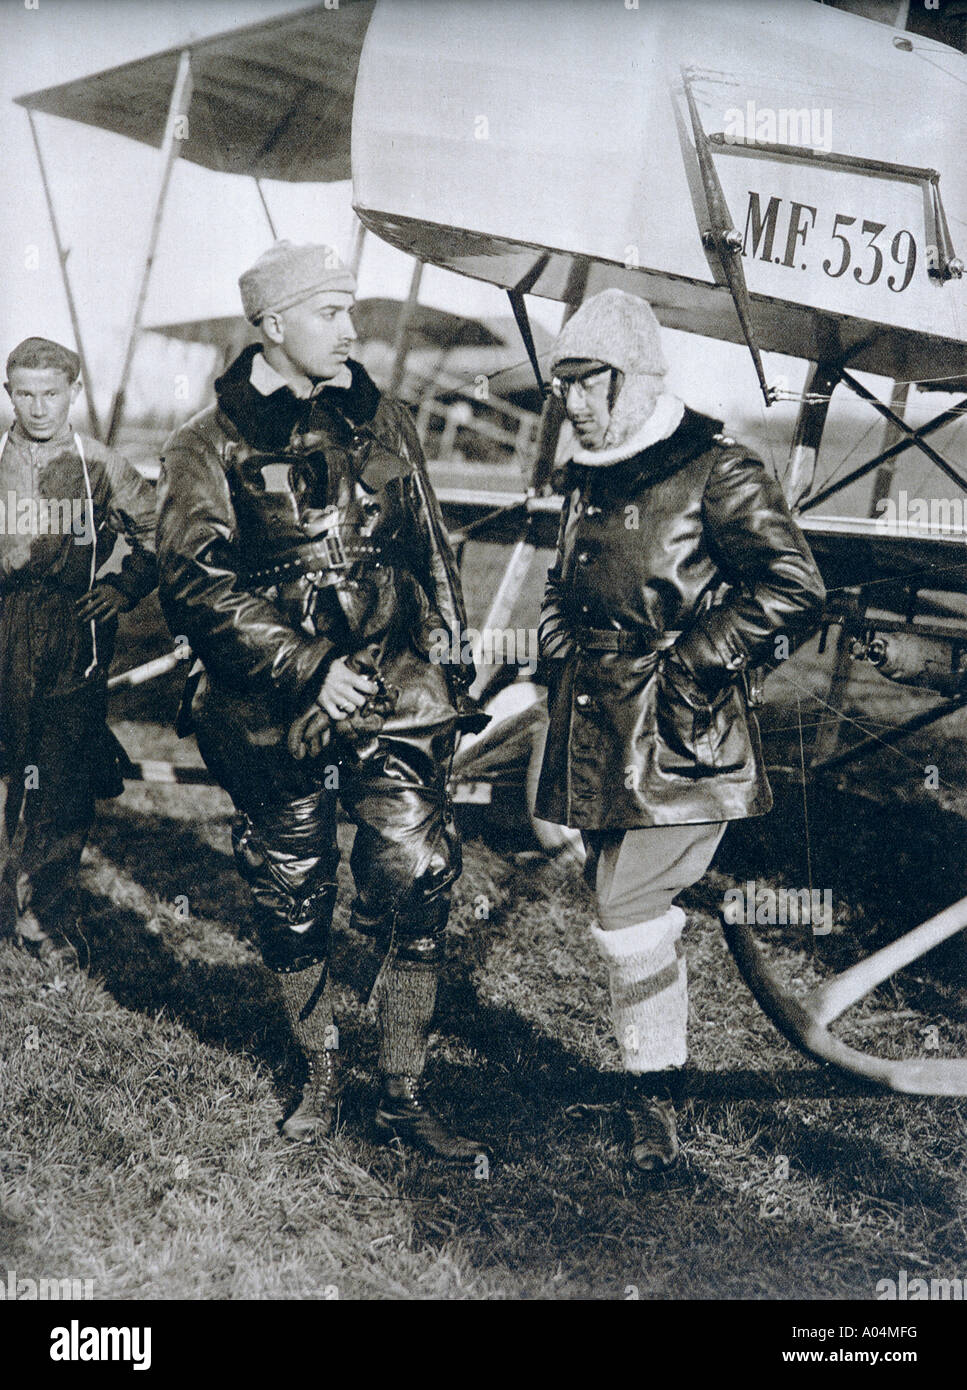 Italian poet, writer, aviator, Gabriele D'Annunzio, 1863 -1938, seen here on the right,  during his service with the Italian Air Force. Stock Photo